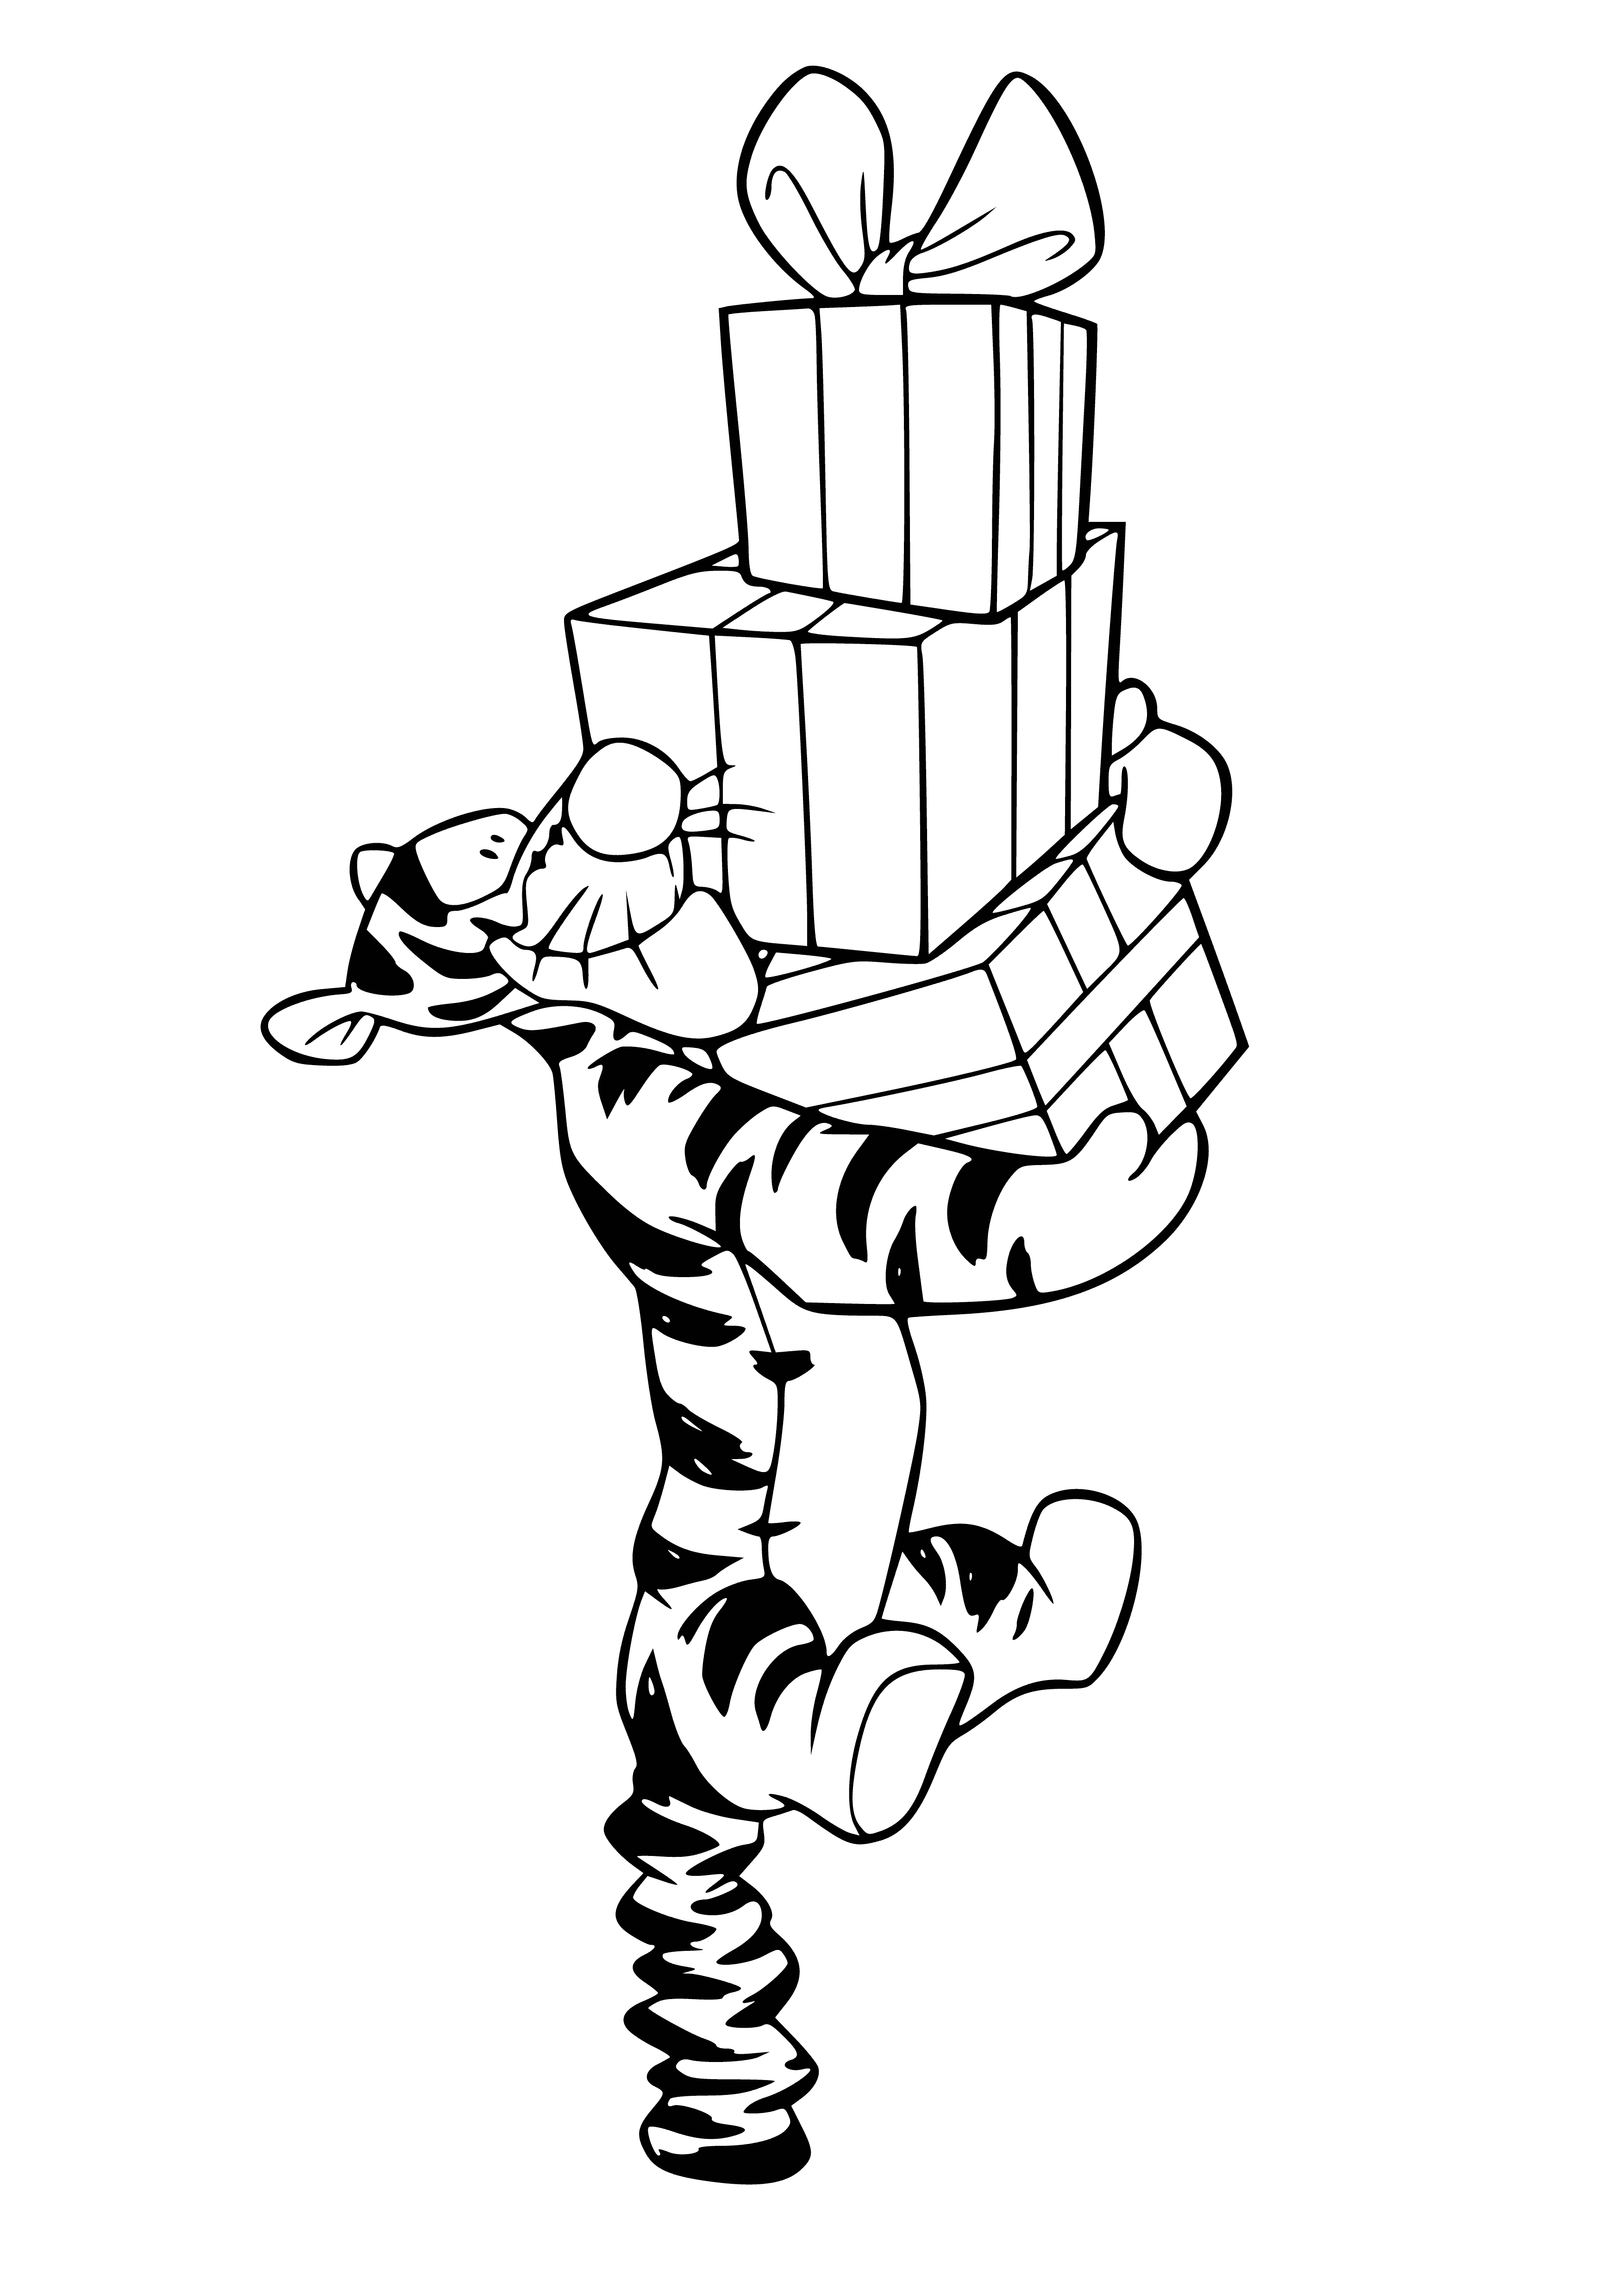 Tigger with gifts coloring page